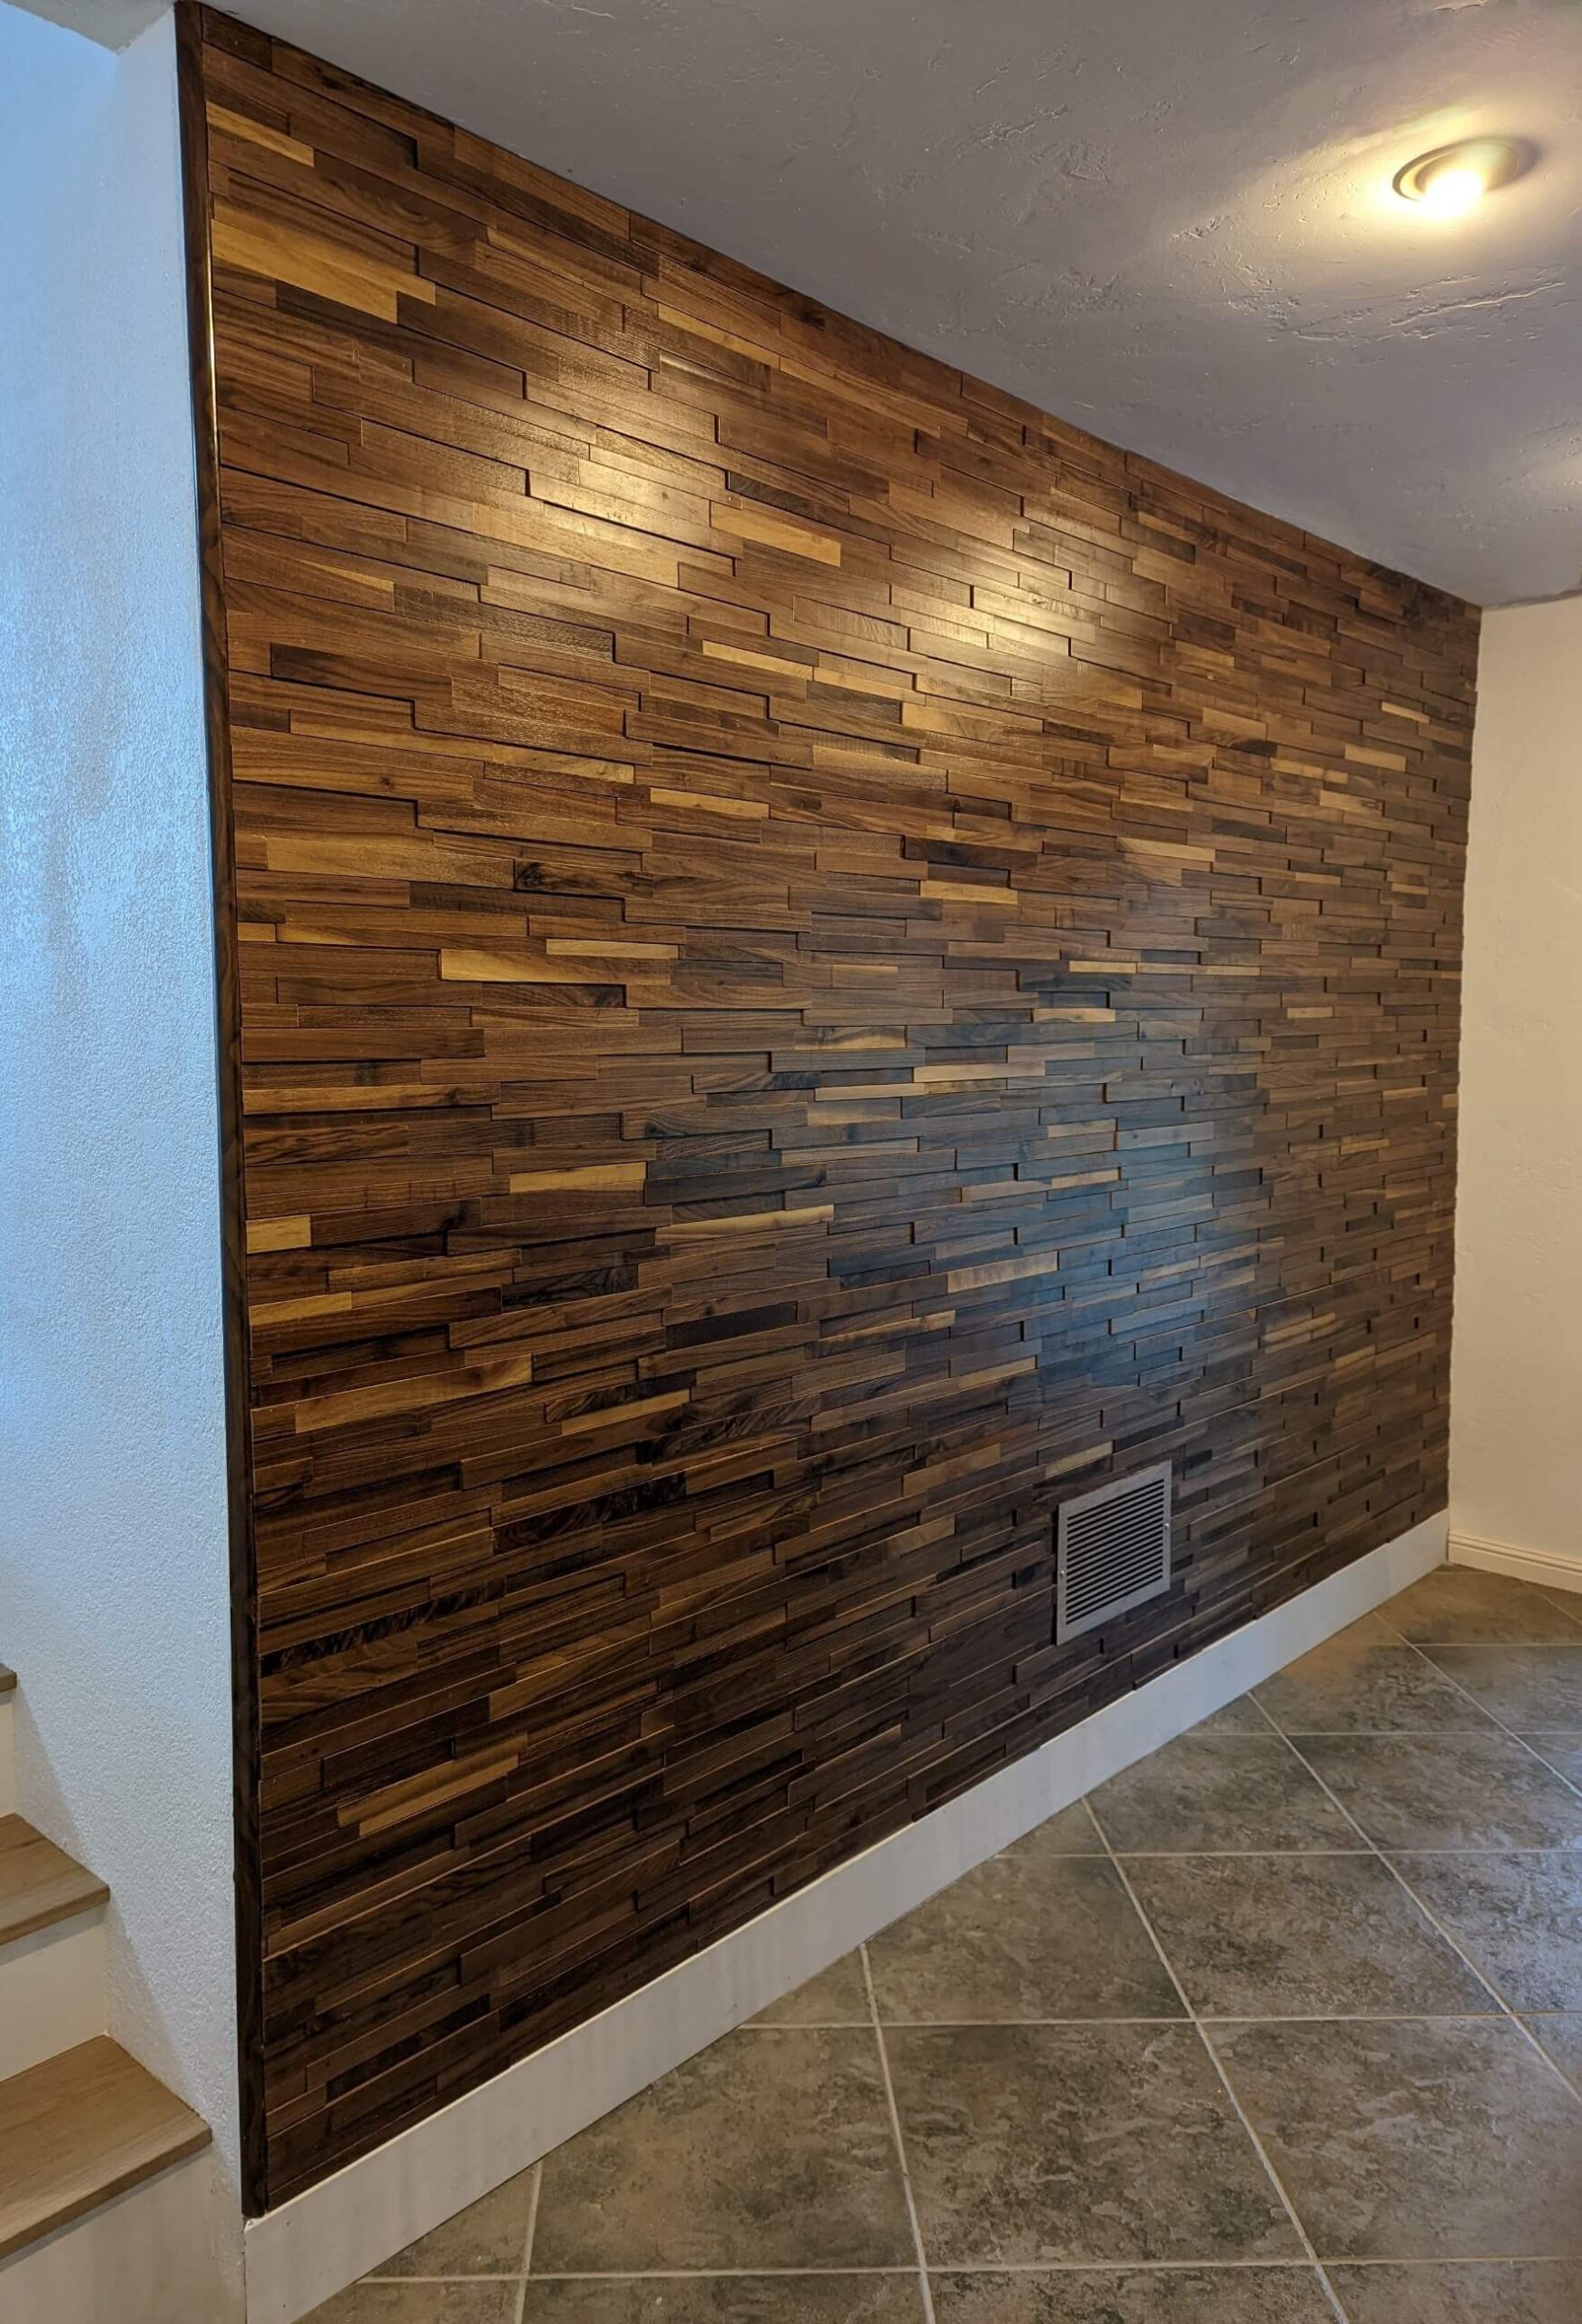 wooden wall panels